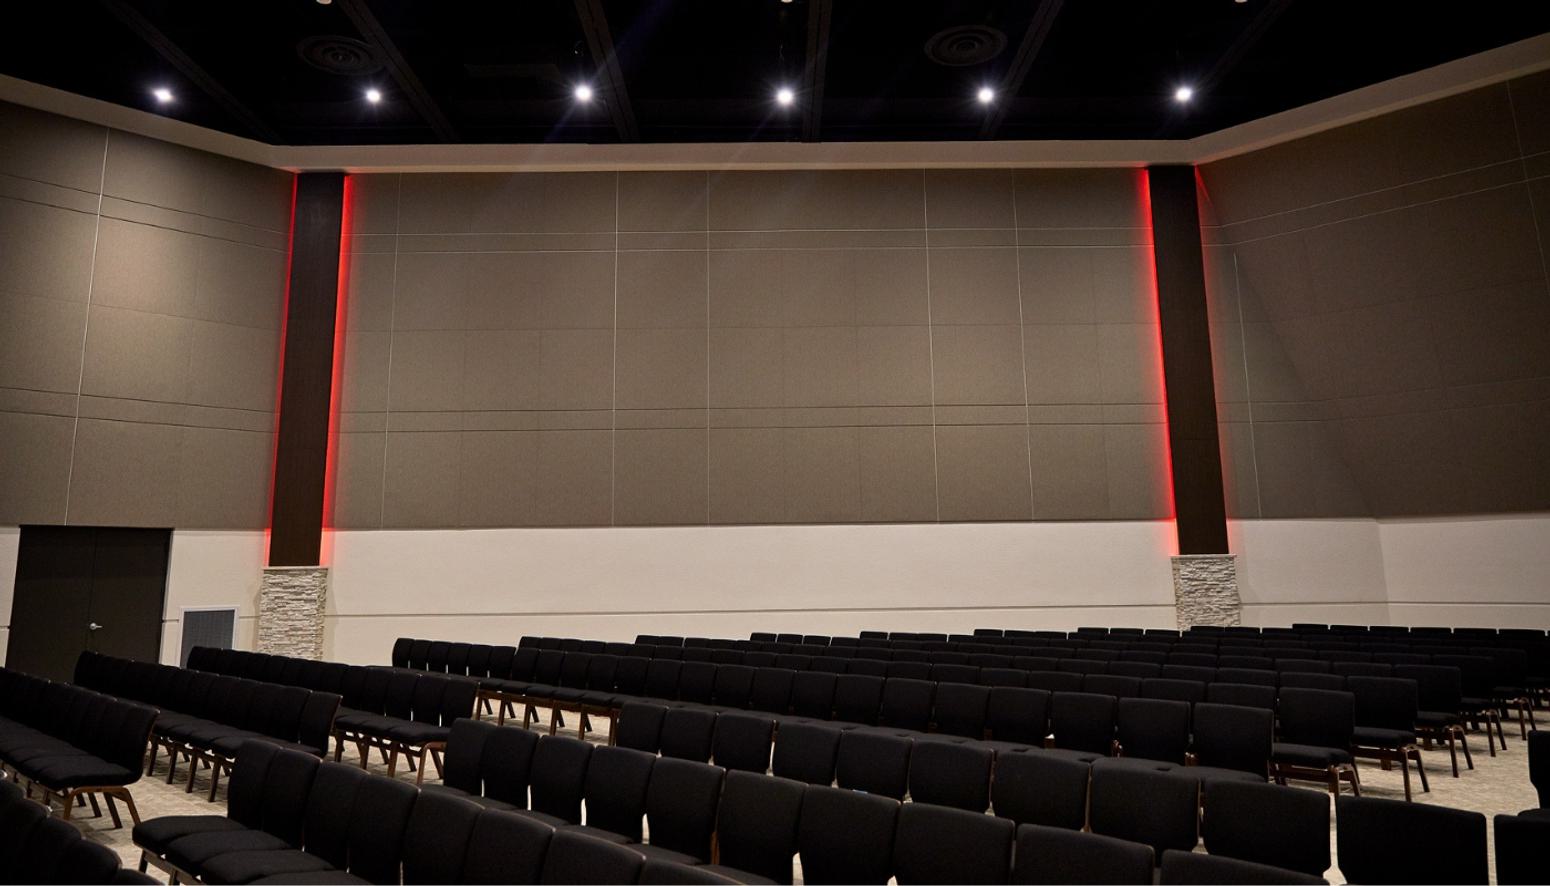 These acoustic solutions for churches were built by acoustic company Paragon 360.